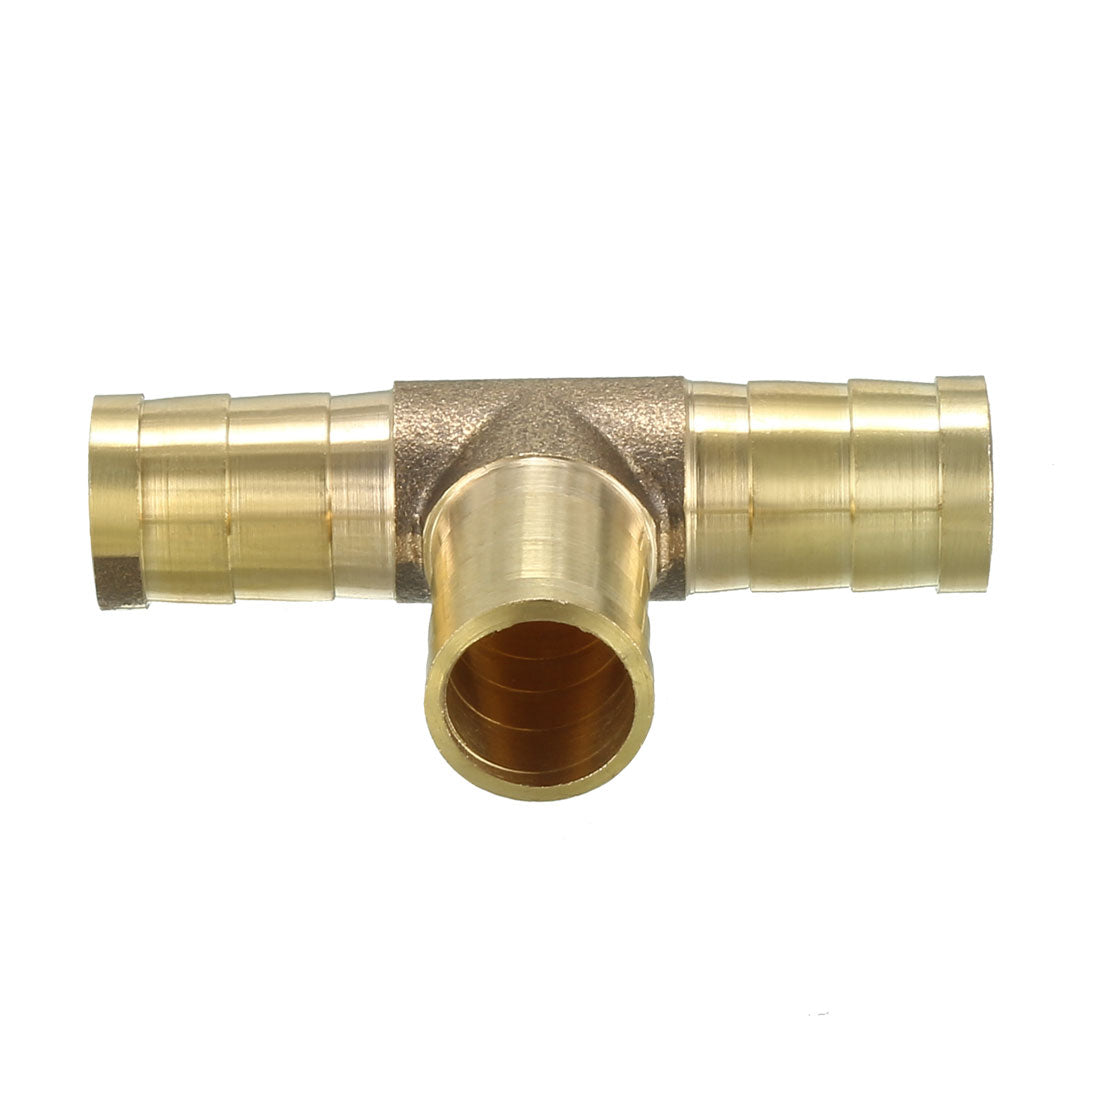 uxcell Uxcell 12mm Brass Tee Barb Hose Fitting T 3 Way Connector Joiner 2pcs